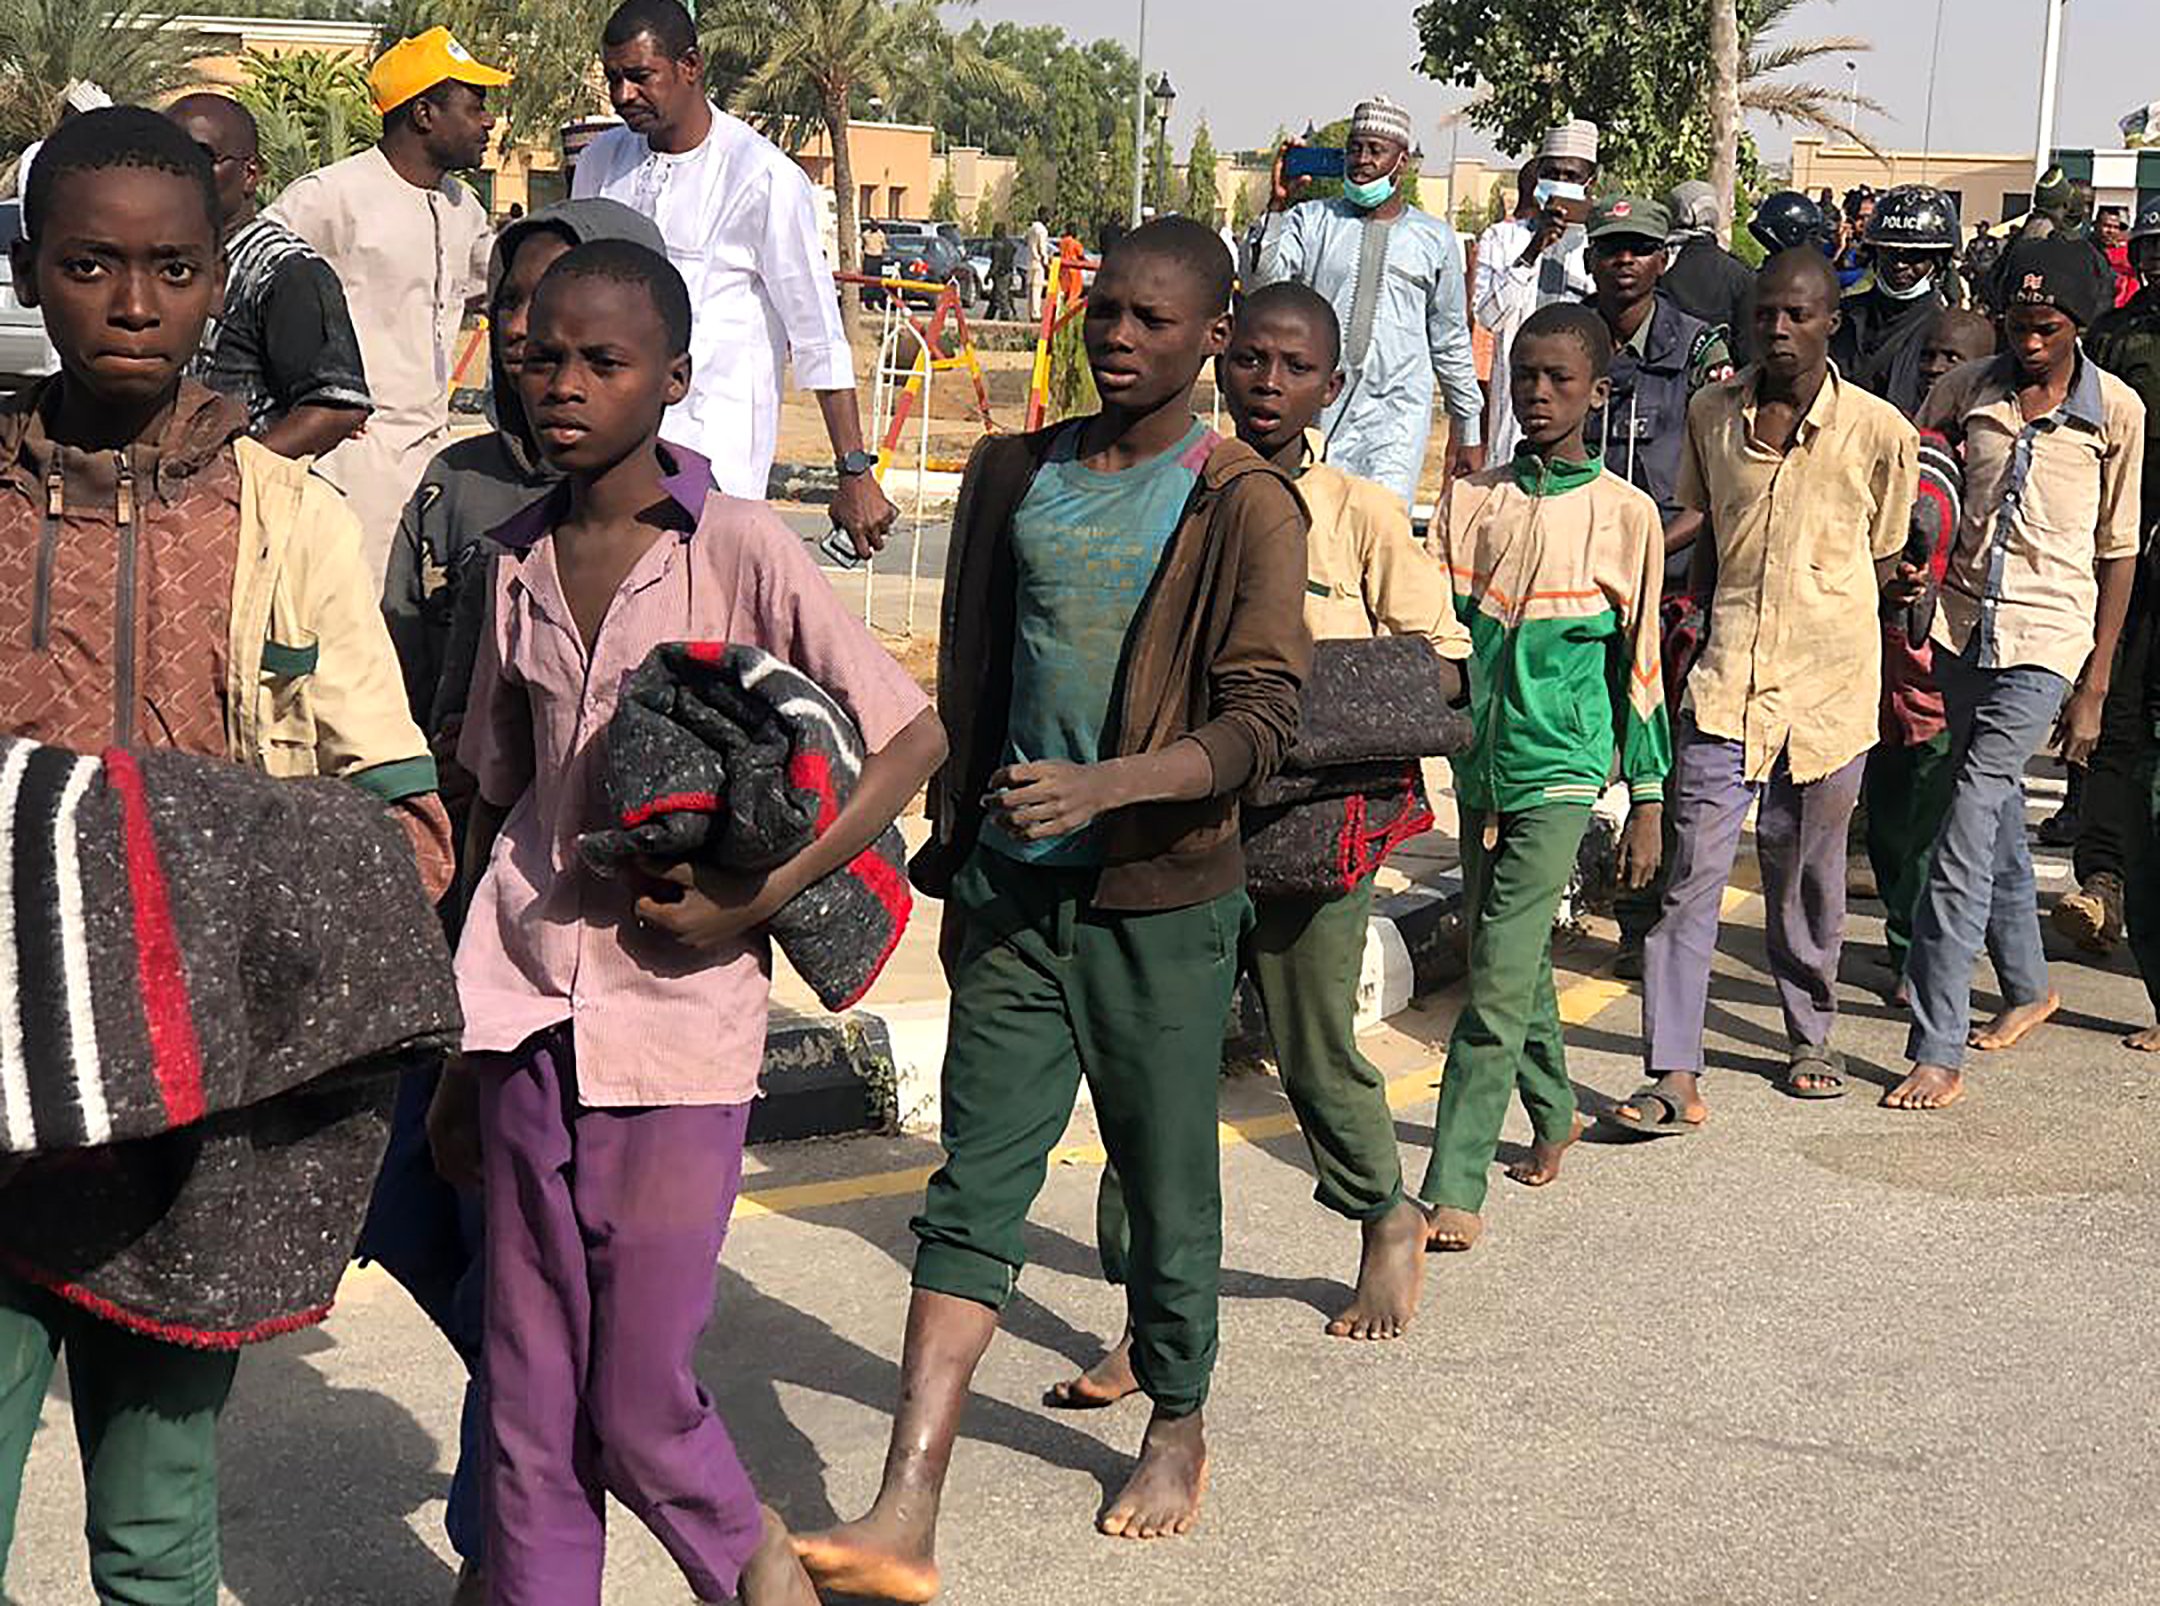 The released Nigerian schoolchildren were greeted after the week of captivity